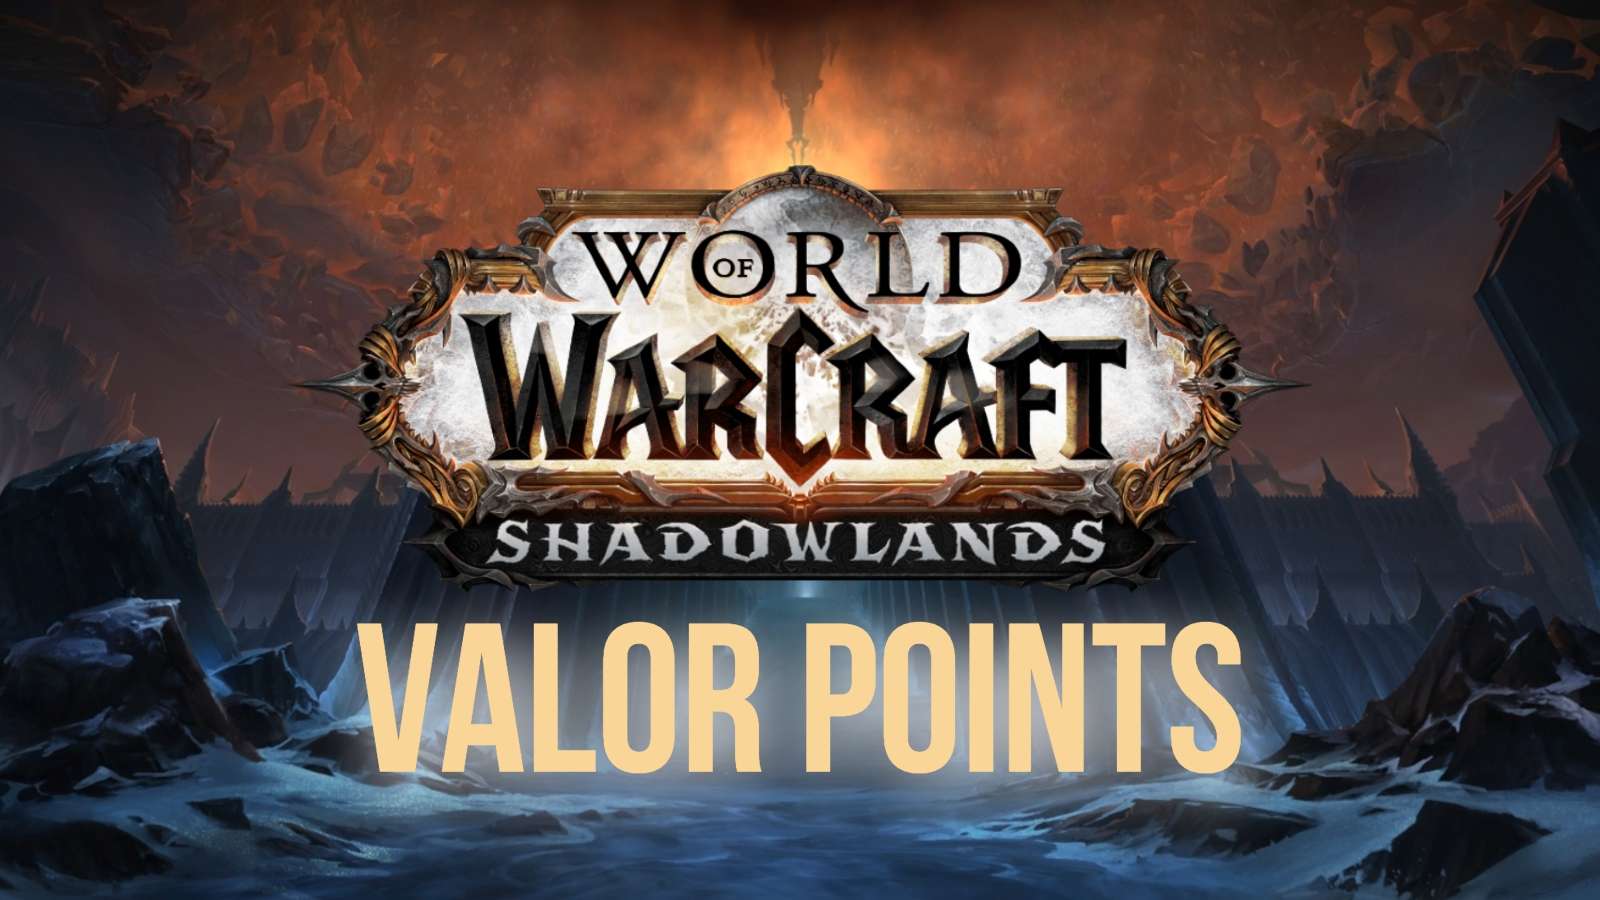 WoW World of Warcraft Shadowlands Valor Points Guide